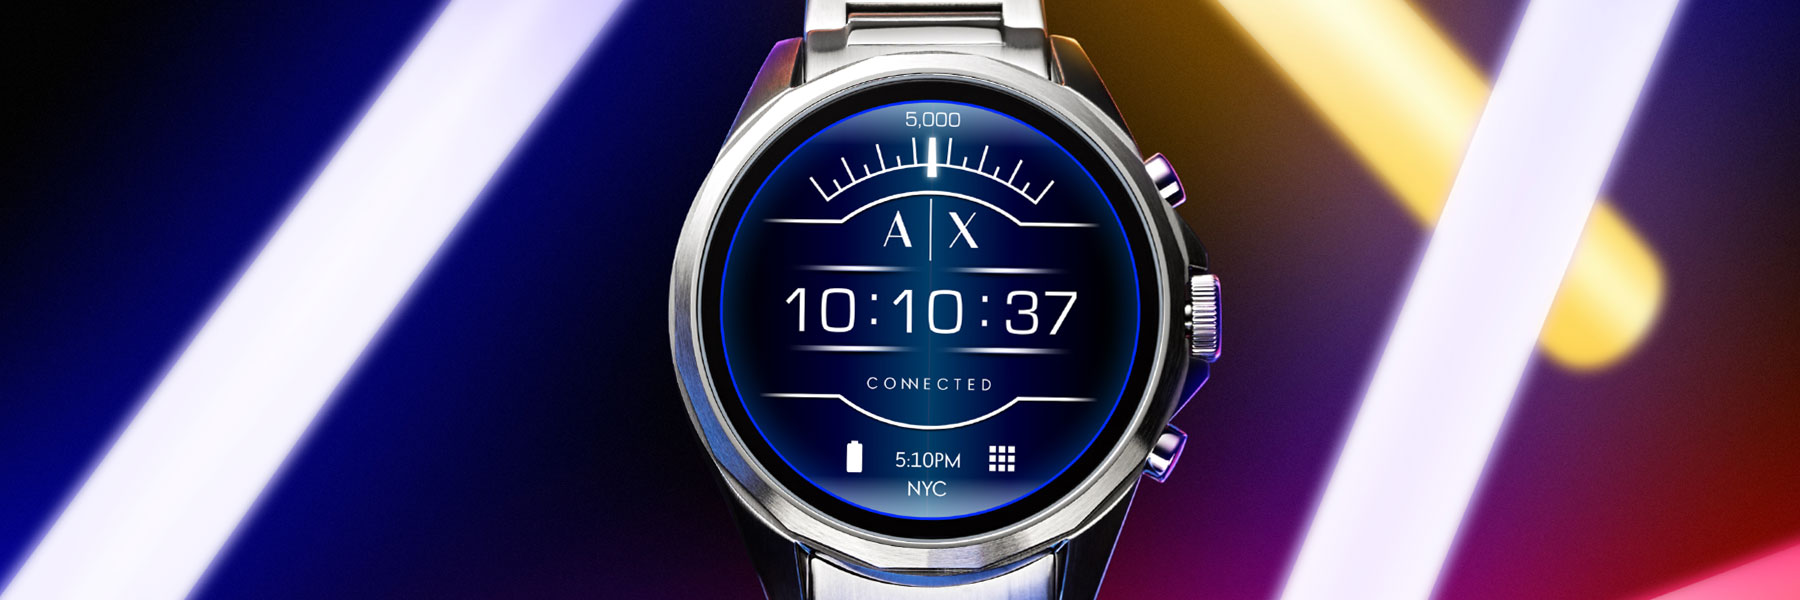 ax smart watches